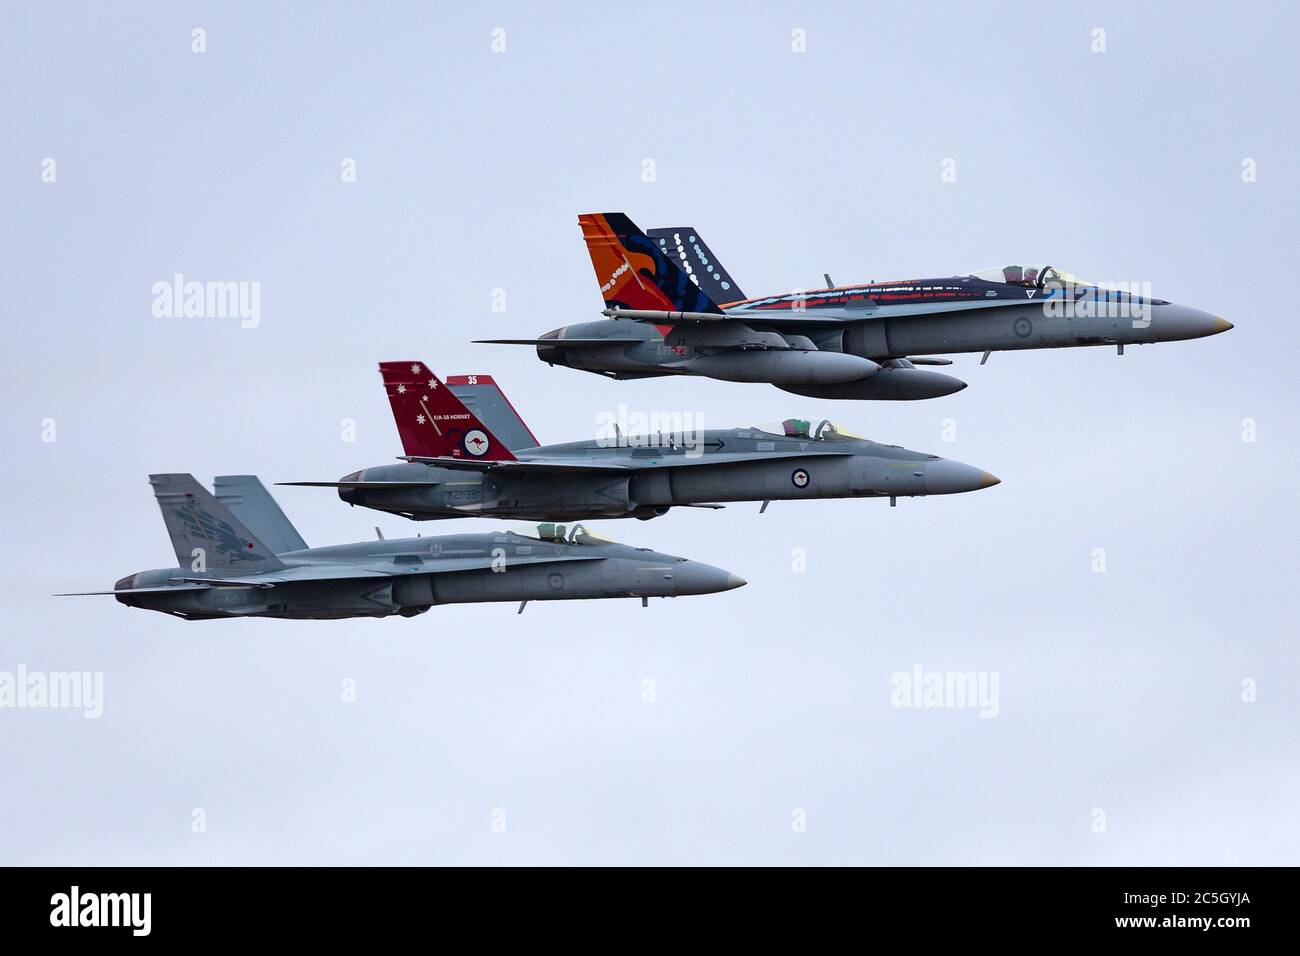 Formation of three Royal Australian Air Force (RAAF) McDonnell Douglas F/A-18 hornet multirole fighter aircraft. Stock Photo